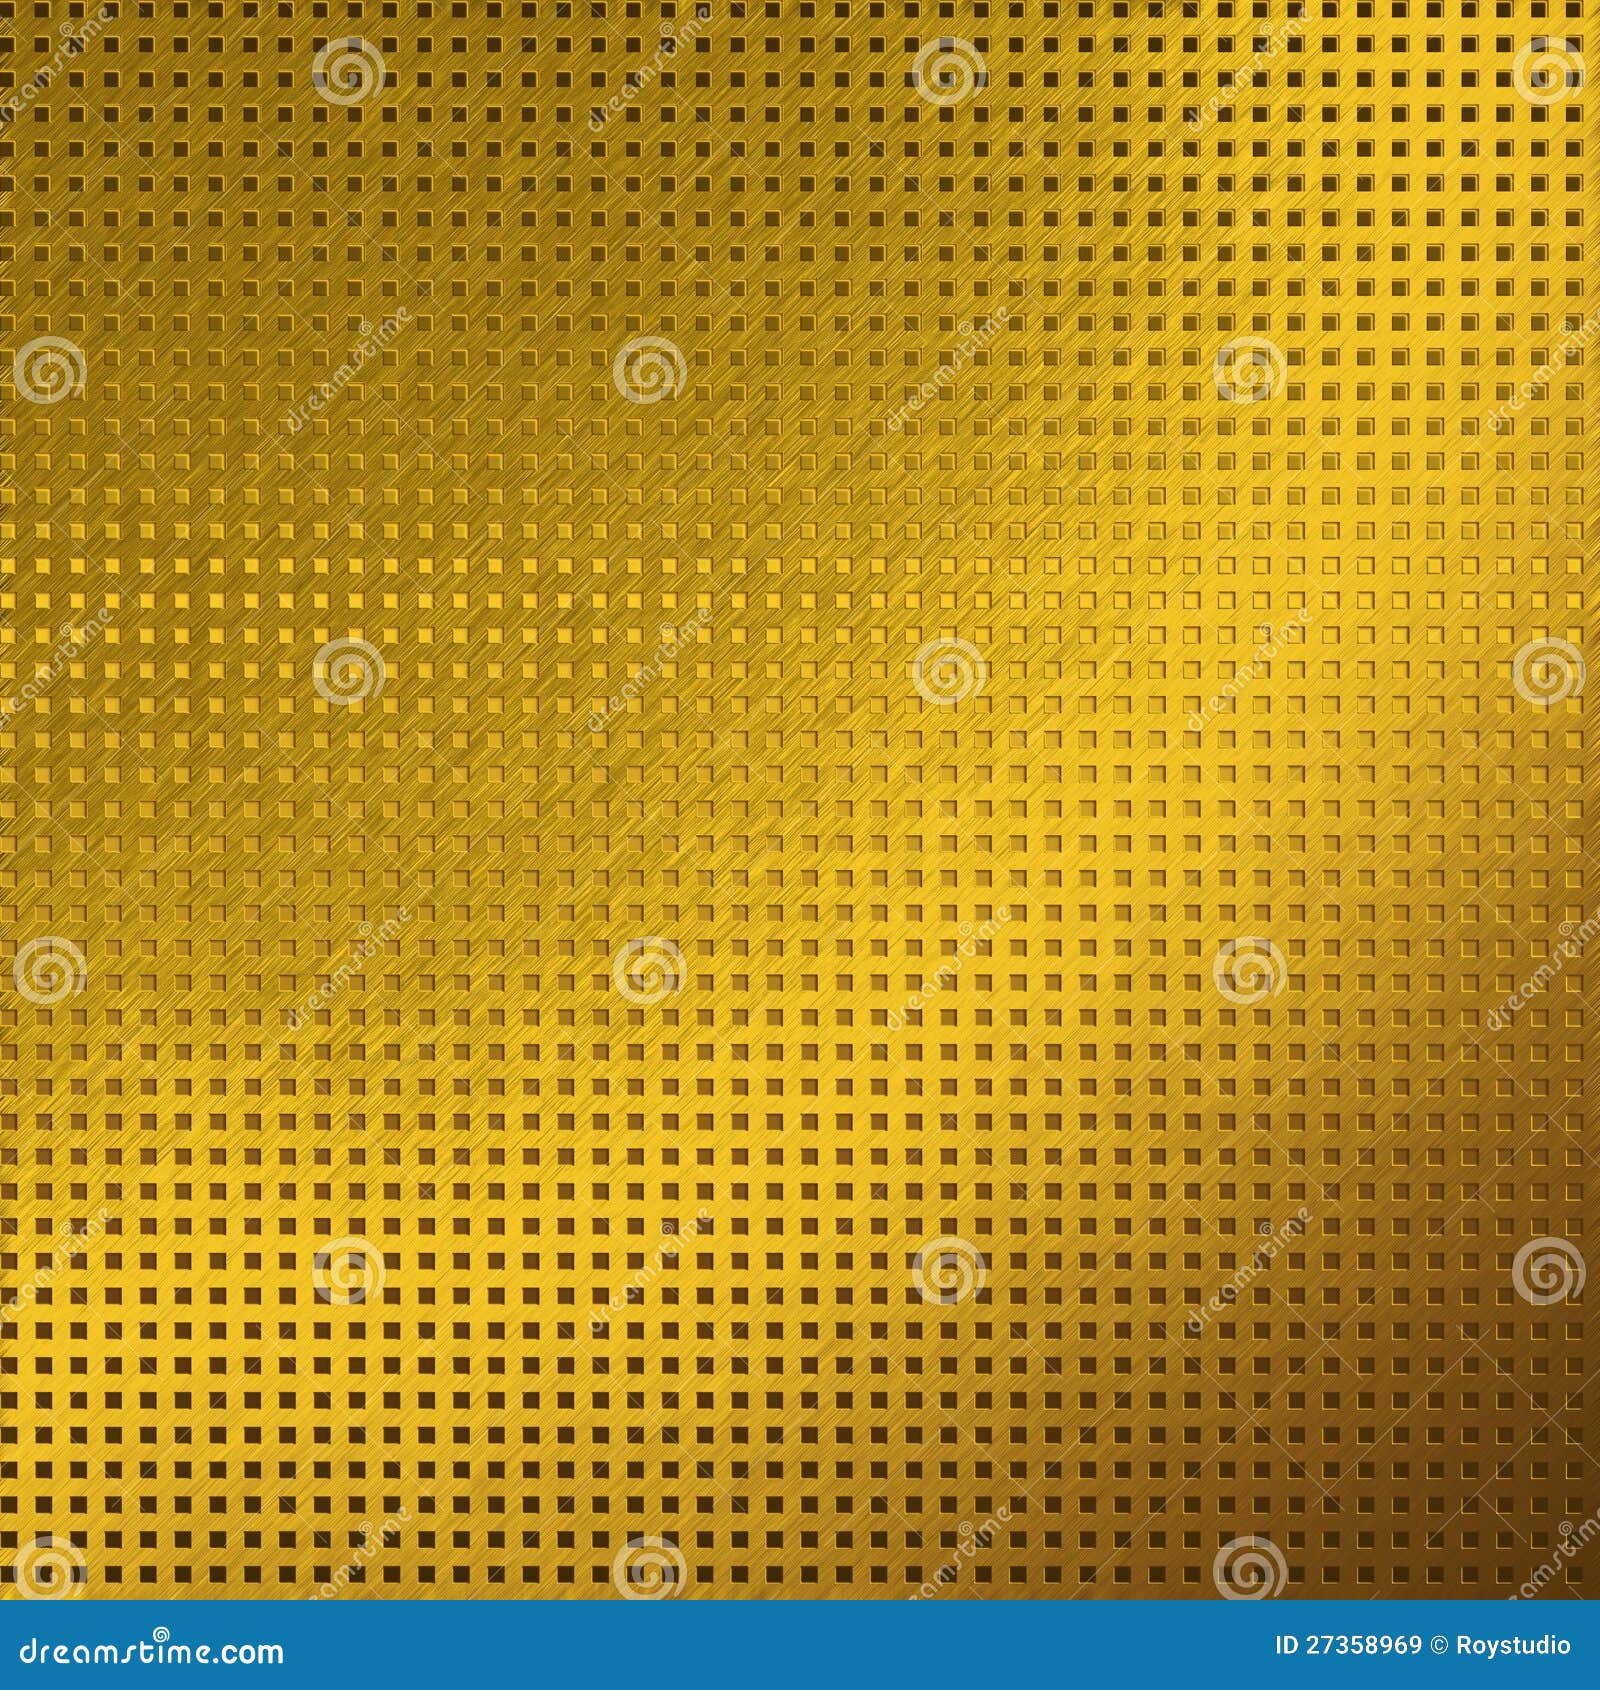 Gold Metal Texture Background Grid Pattern Stock Image - Image of board,  decor: 27358969